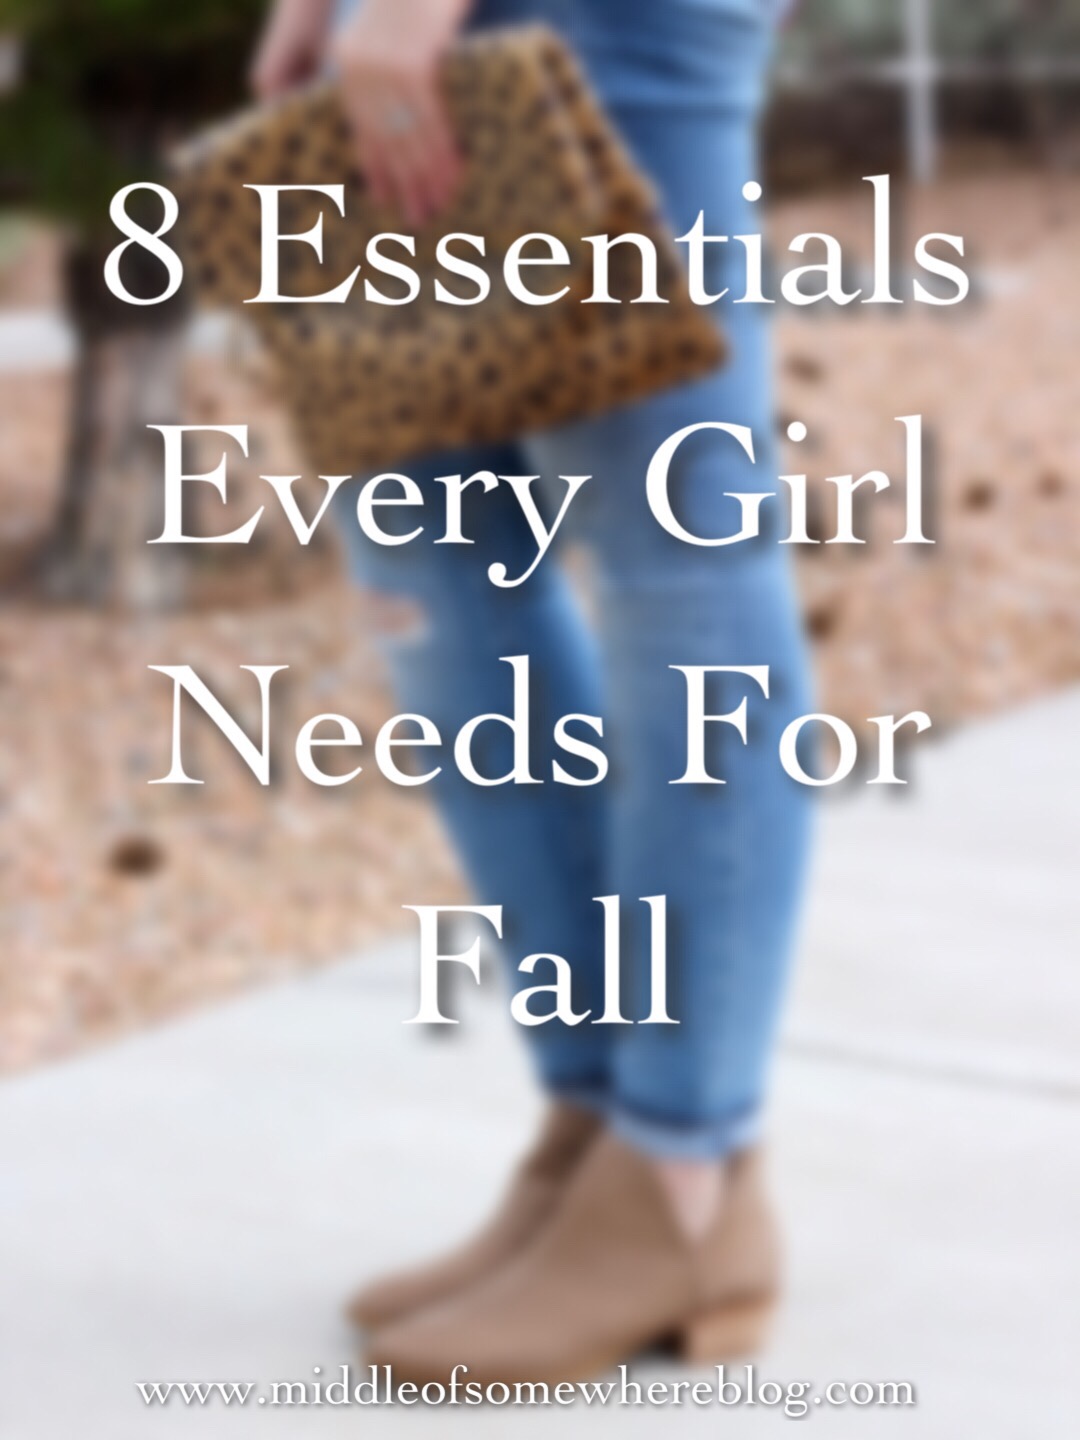 8 essentials every girl needs for fall